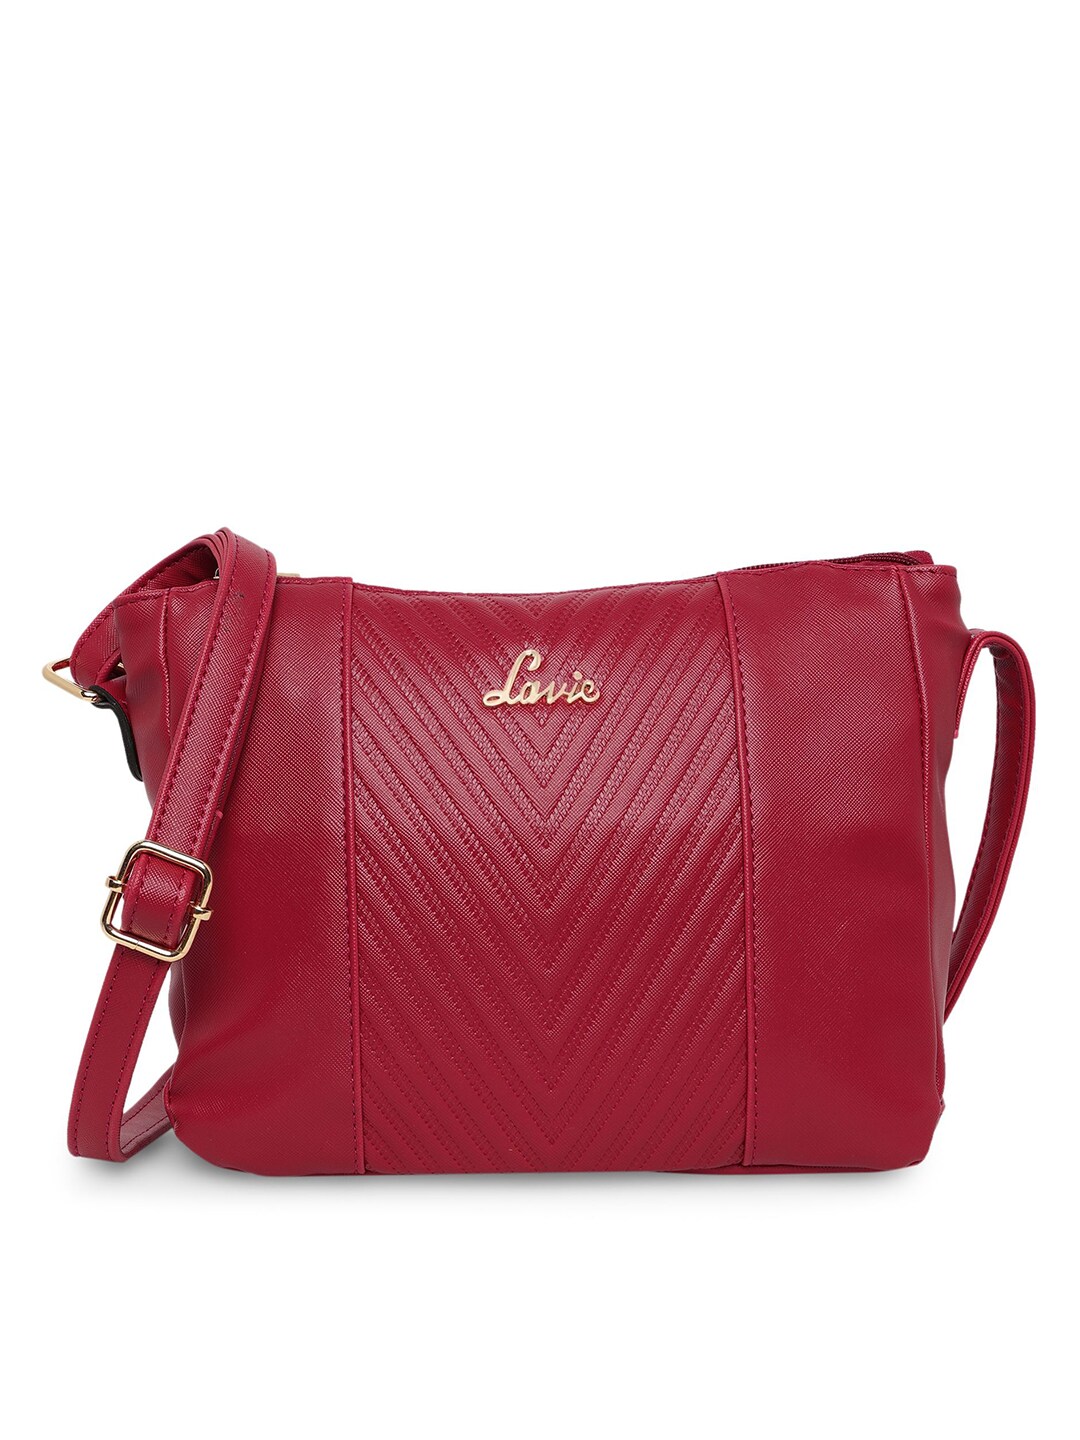 Lavie Pink Textured Sling Bag Price in India